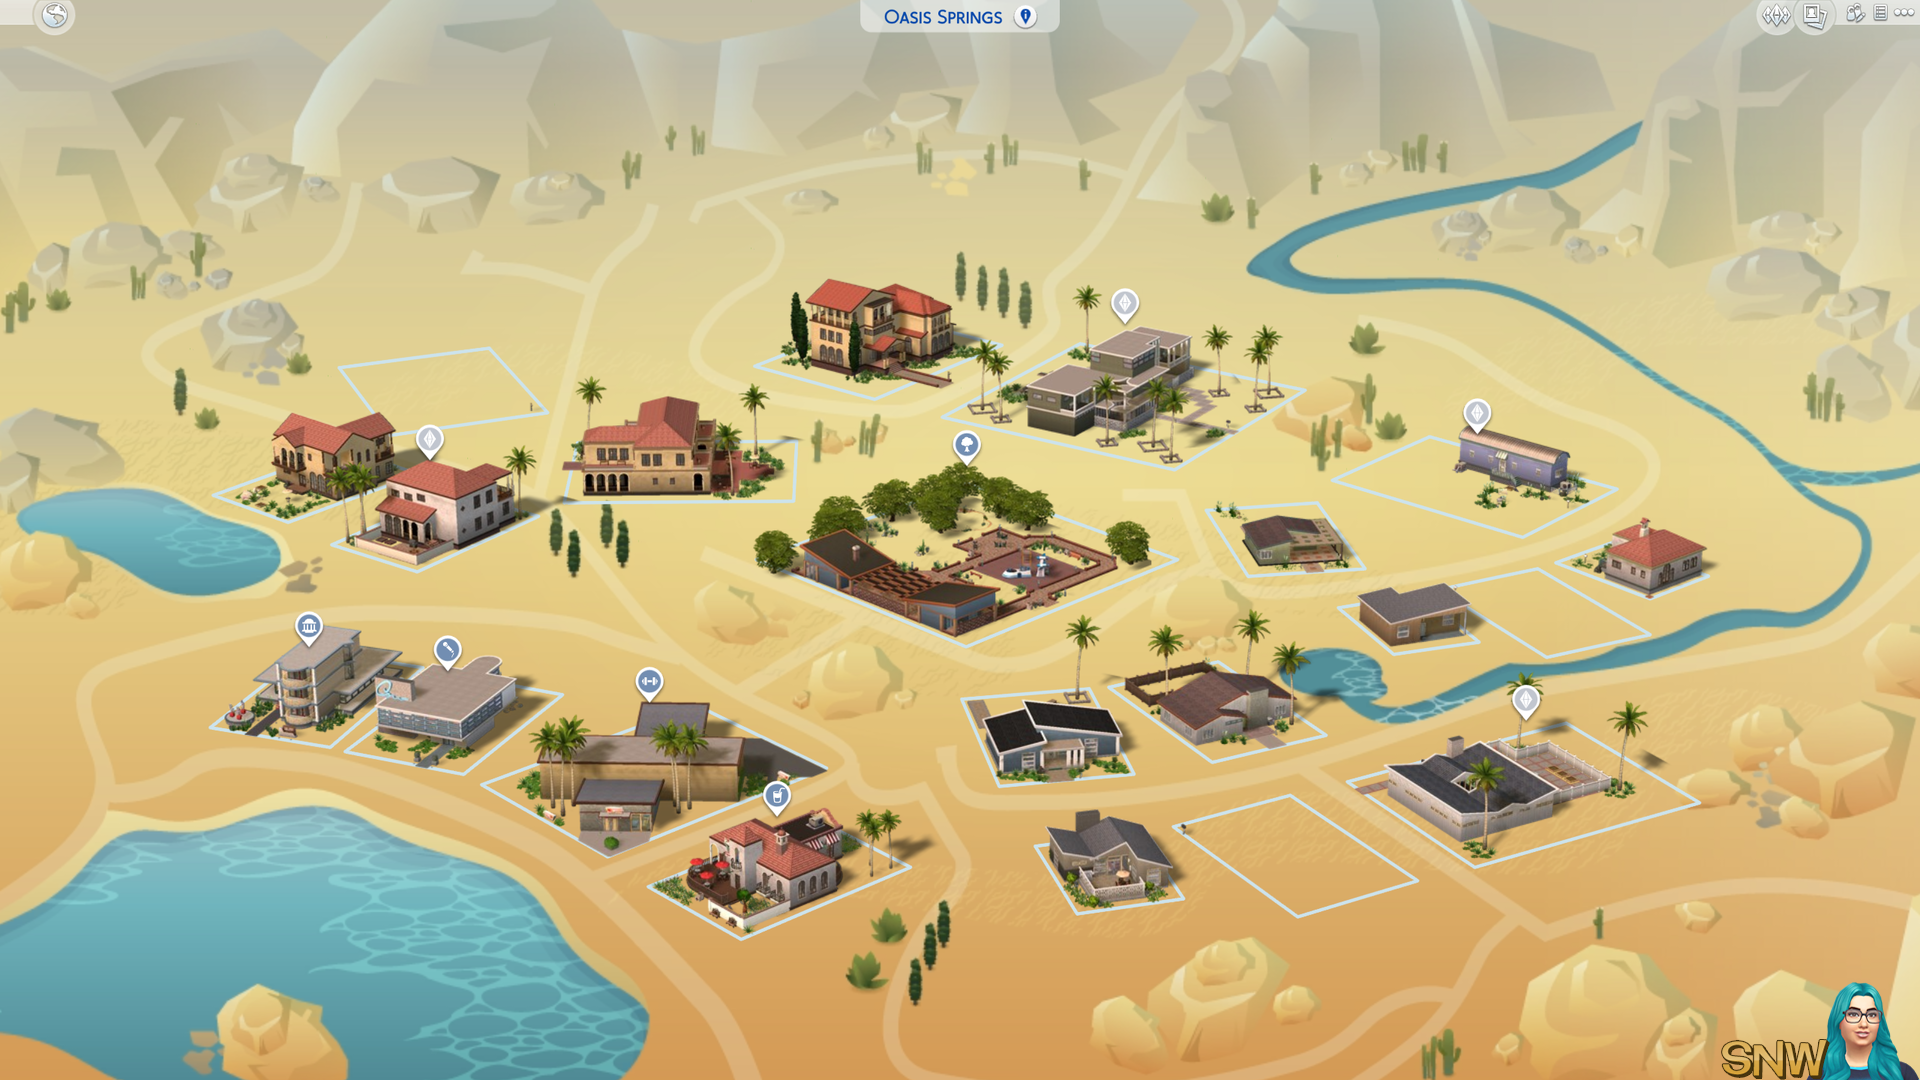 The Sims 4: Oasis Springs world